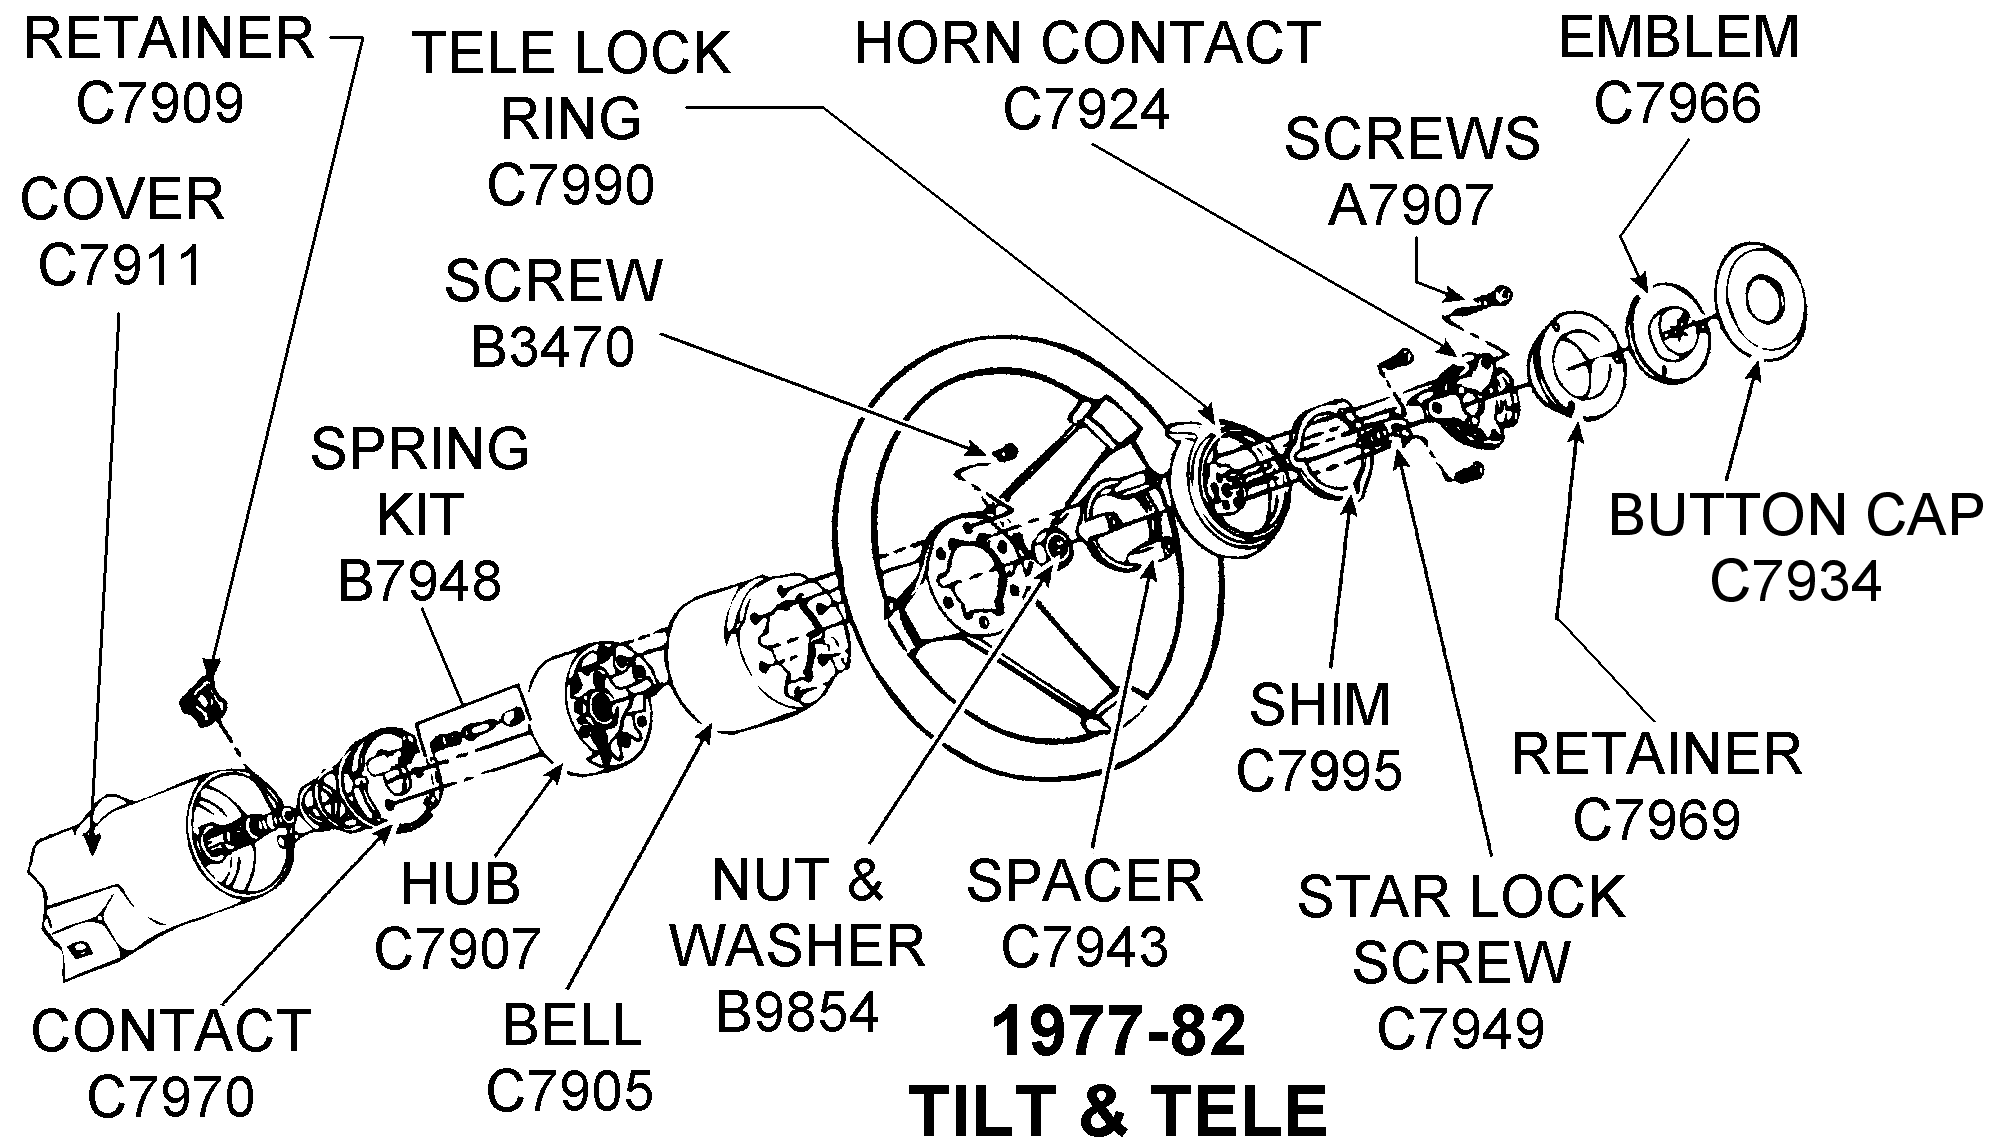 1982 horn repair questions, what are these ... 89 ford bronco headlight wiring diagram 